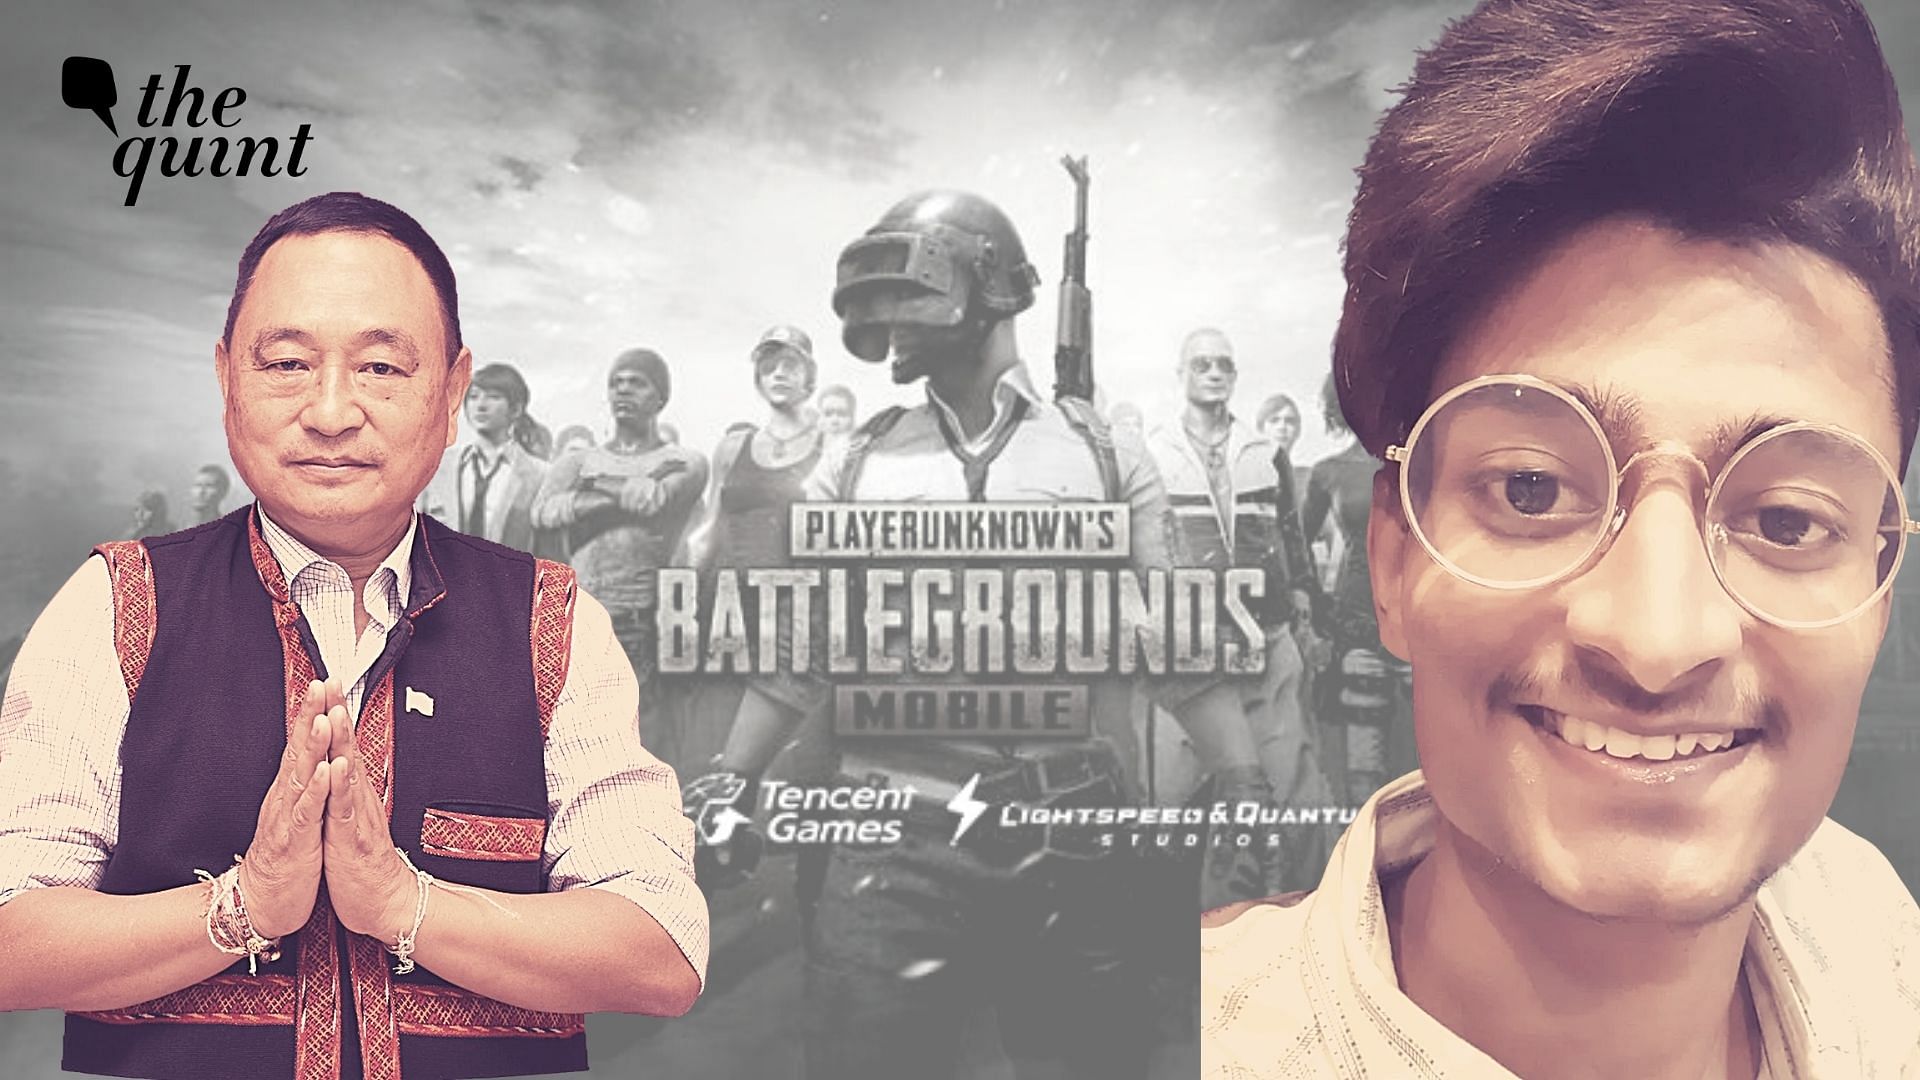 Irked by Ering’s demand to ban PUBG’s Battlegrounds Mobile India, Paras Singh said Ninong Ering “looked Chinese”.